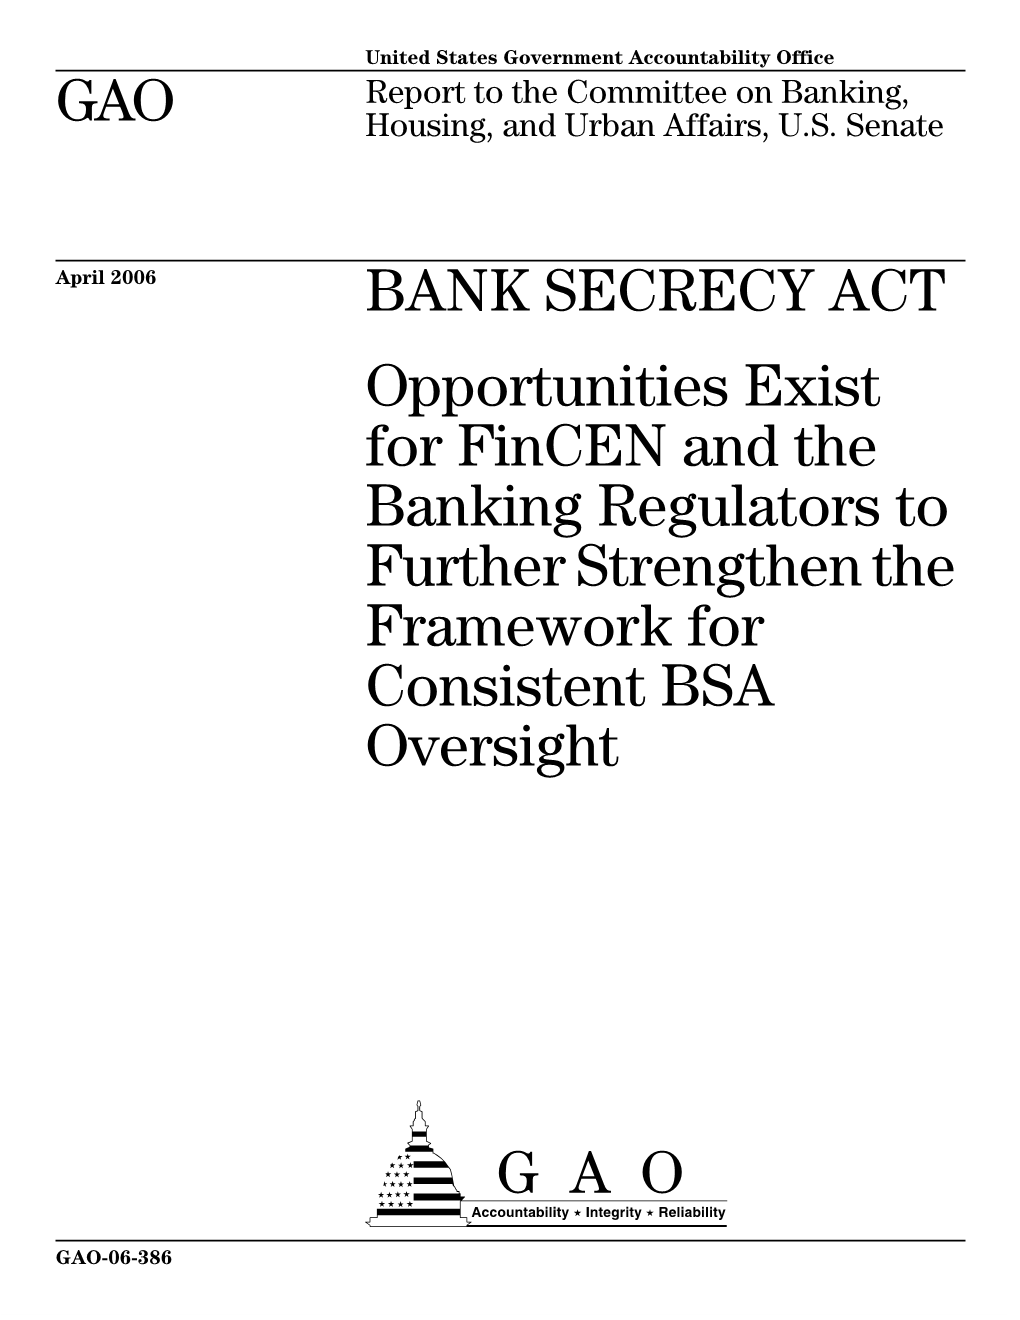 GAO-06-386 Bank Secrecy Act: Opportunities Exist for Fincen And